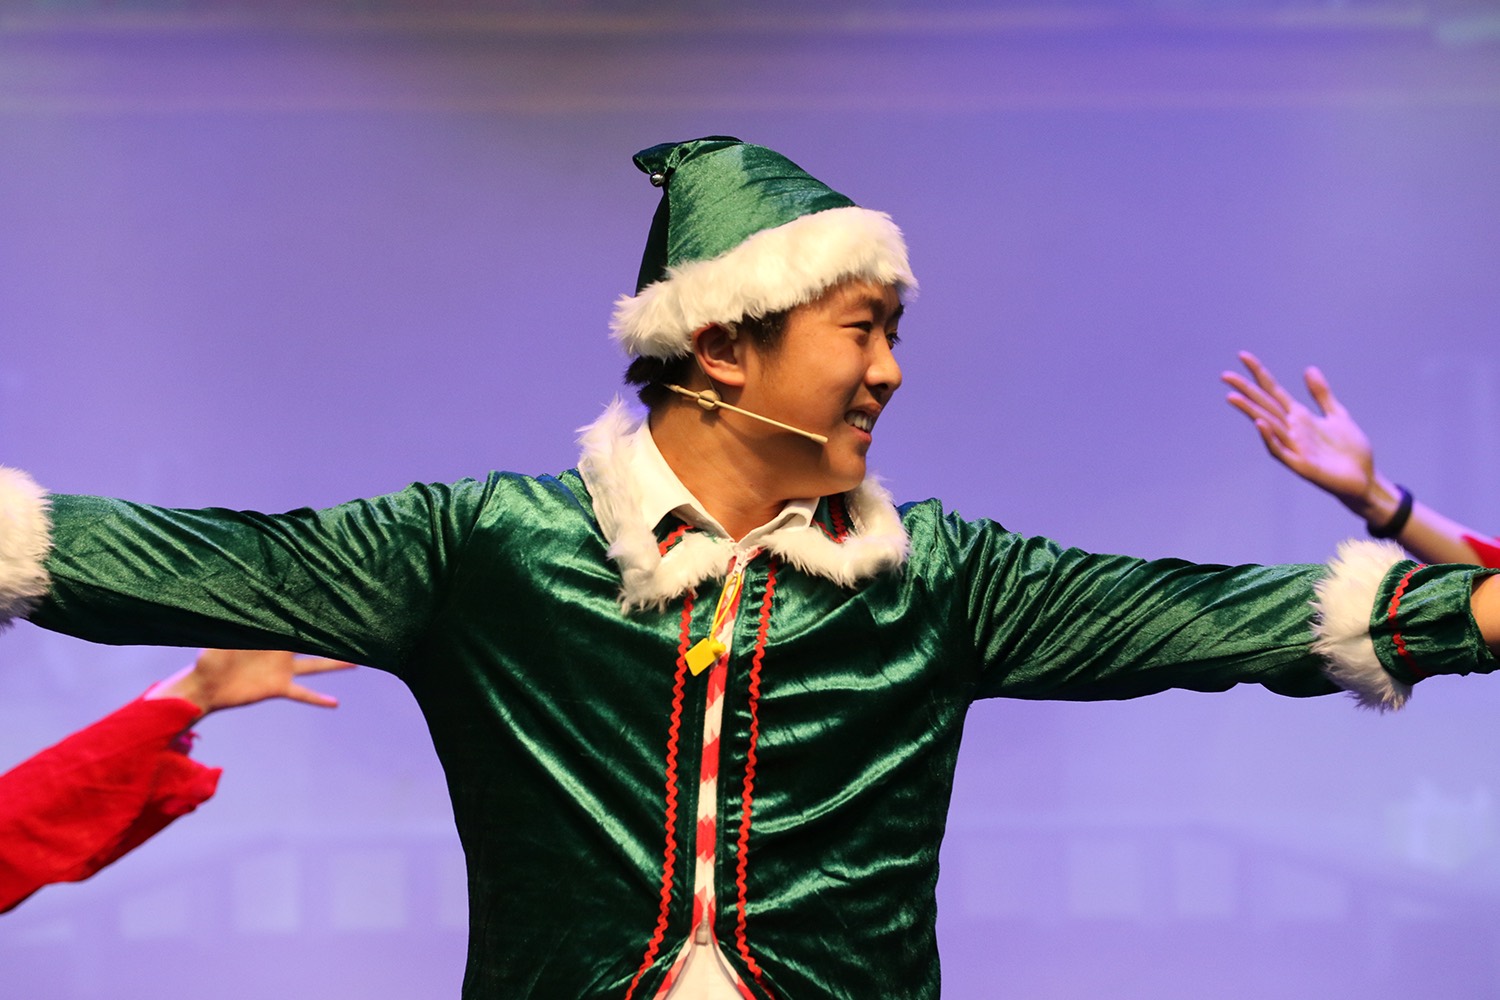 Elf The Musical - A Secondary School Production - Elf School Production